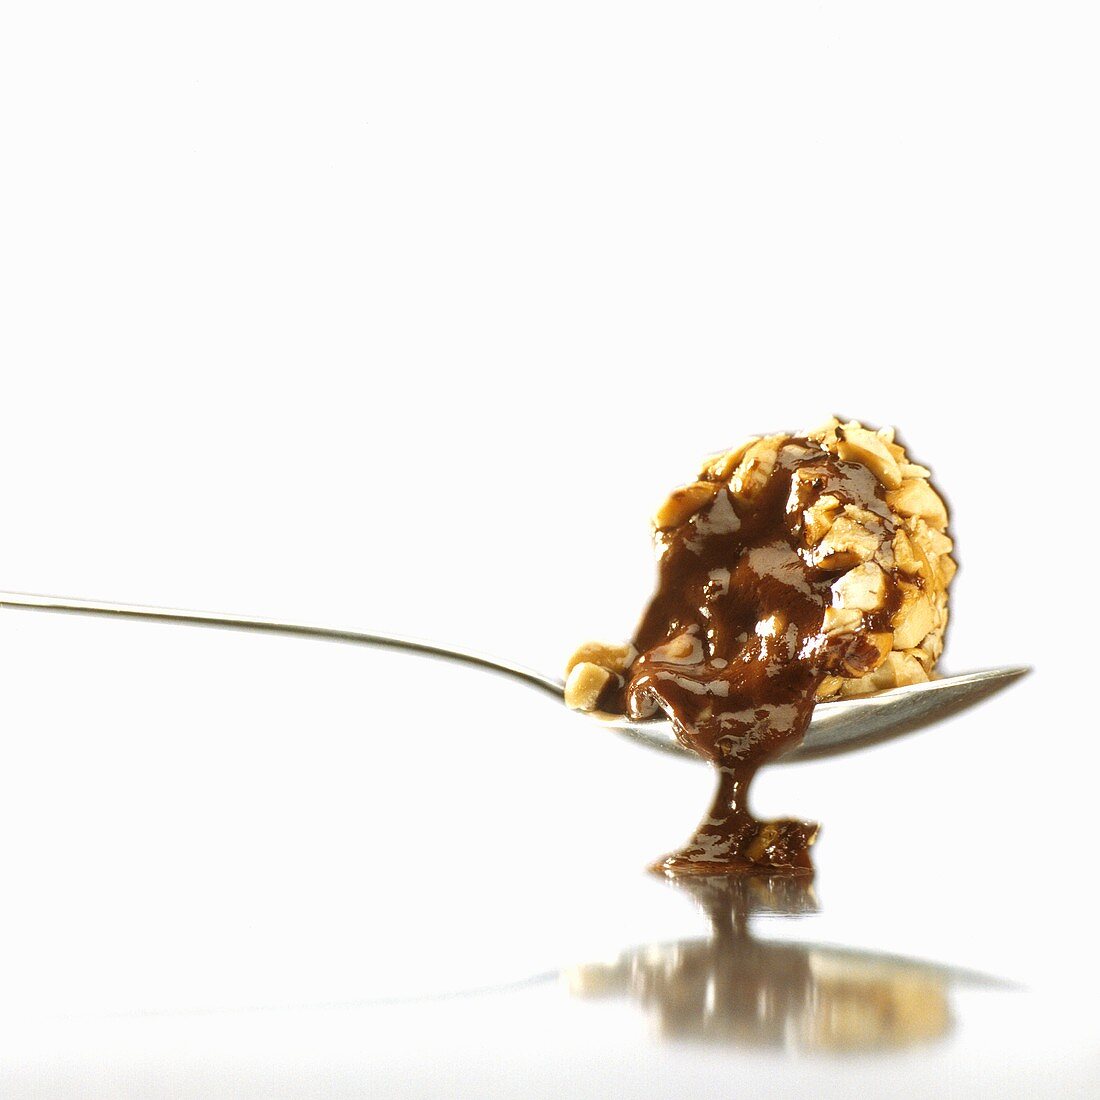 A melting chocolate truffle on a spoon